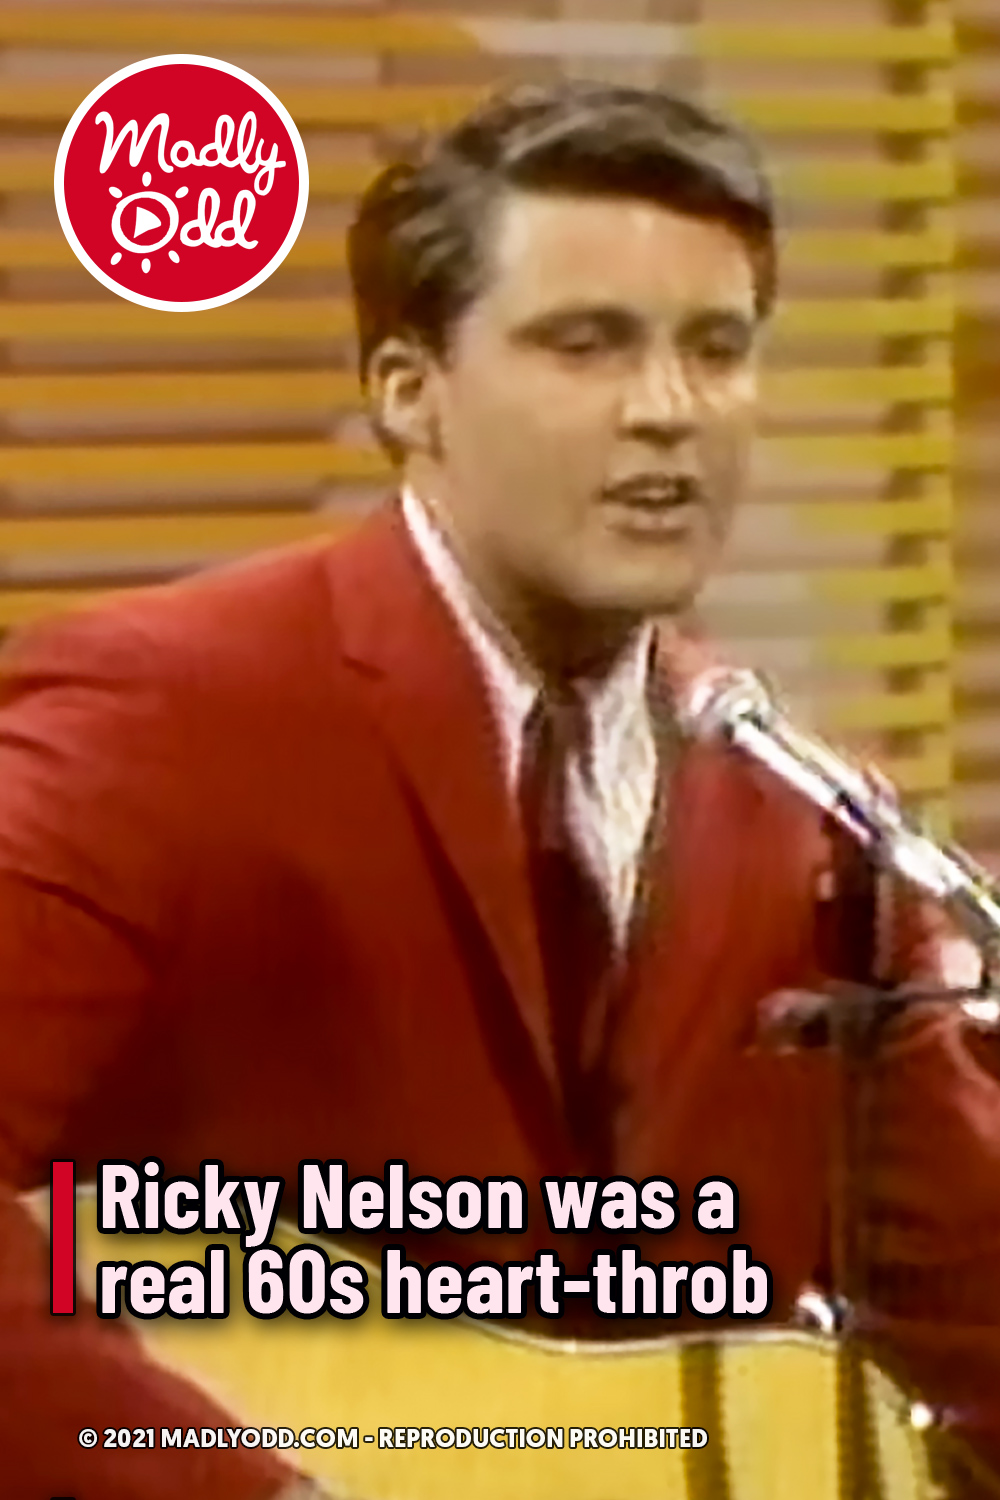 Ricky Nelson was a real 60s heart-throb